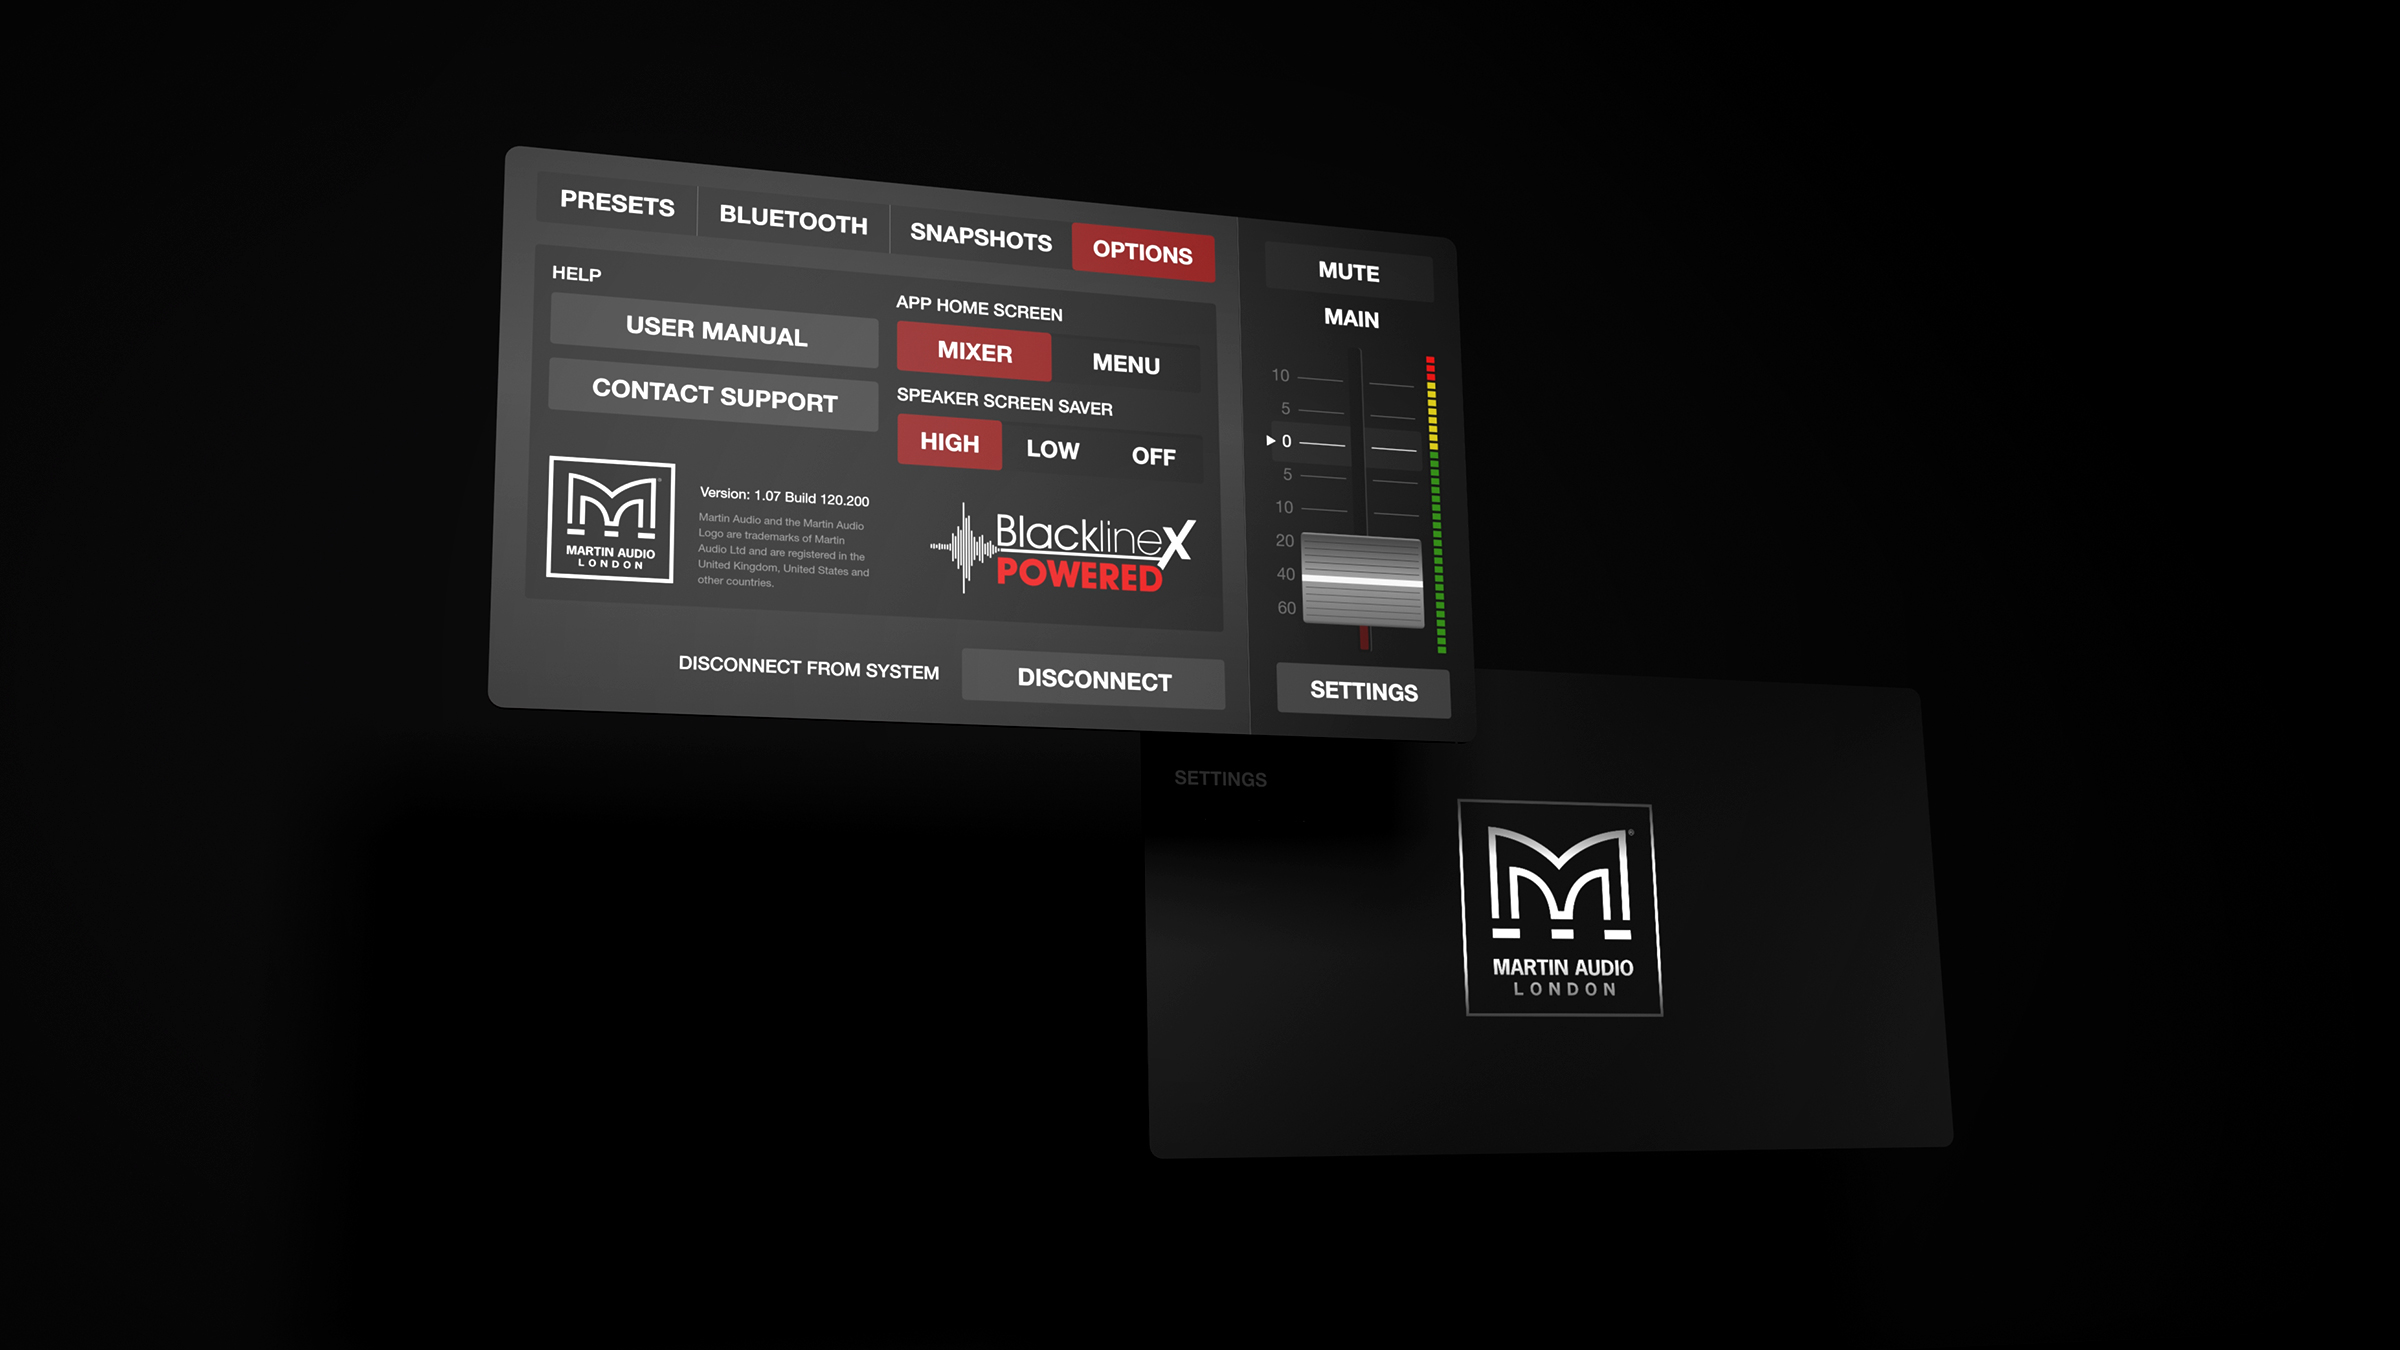 The overall design UI takes the existing premium Martin Audio branding and elevates it into digital experience design.